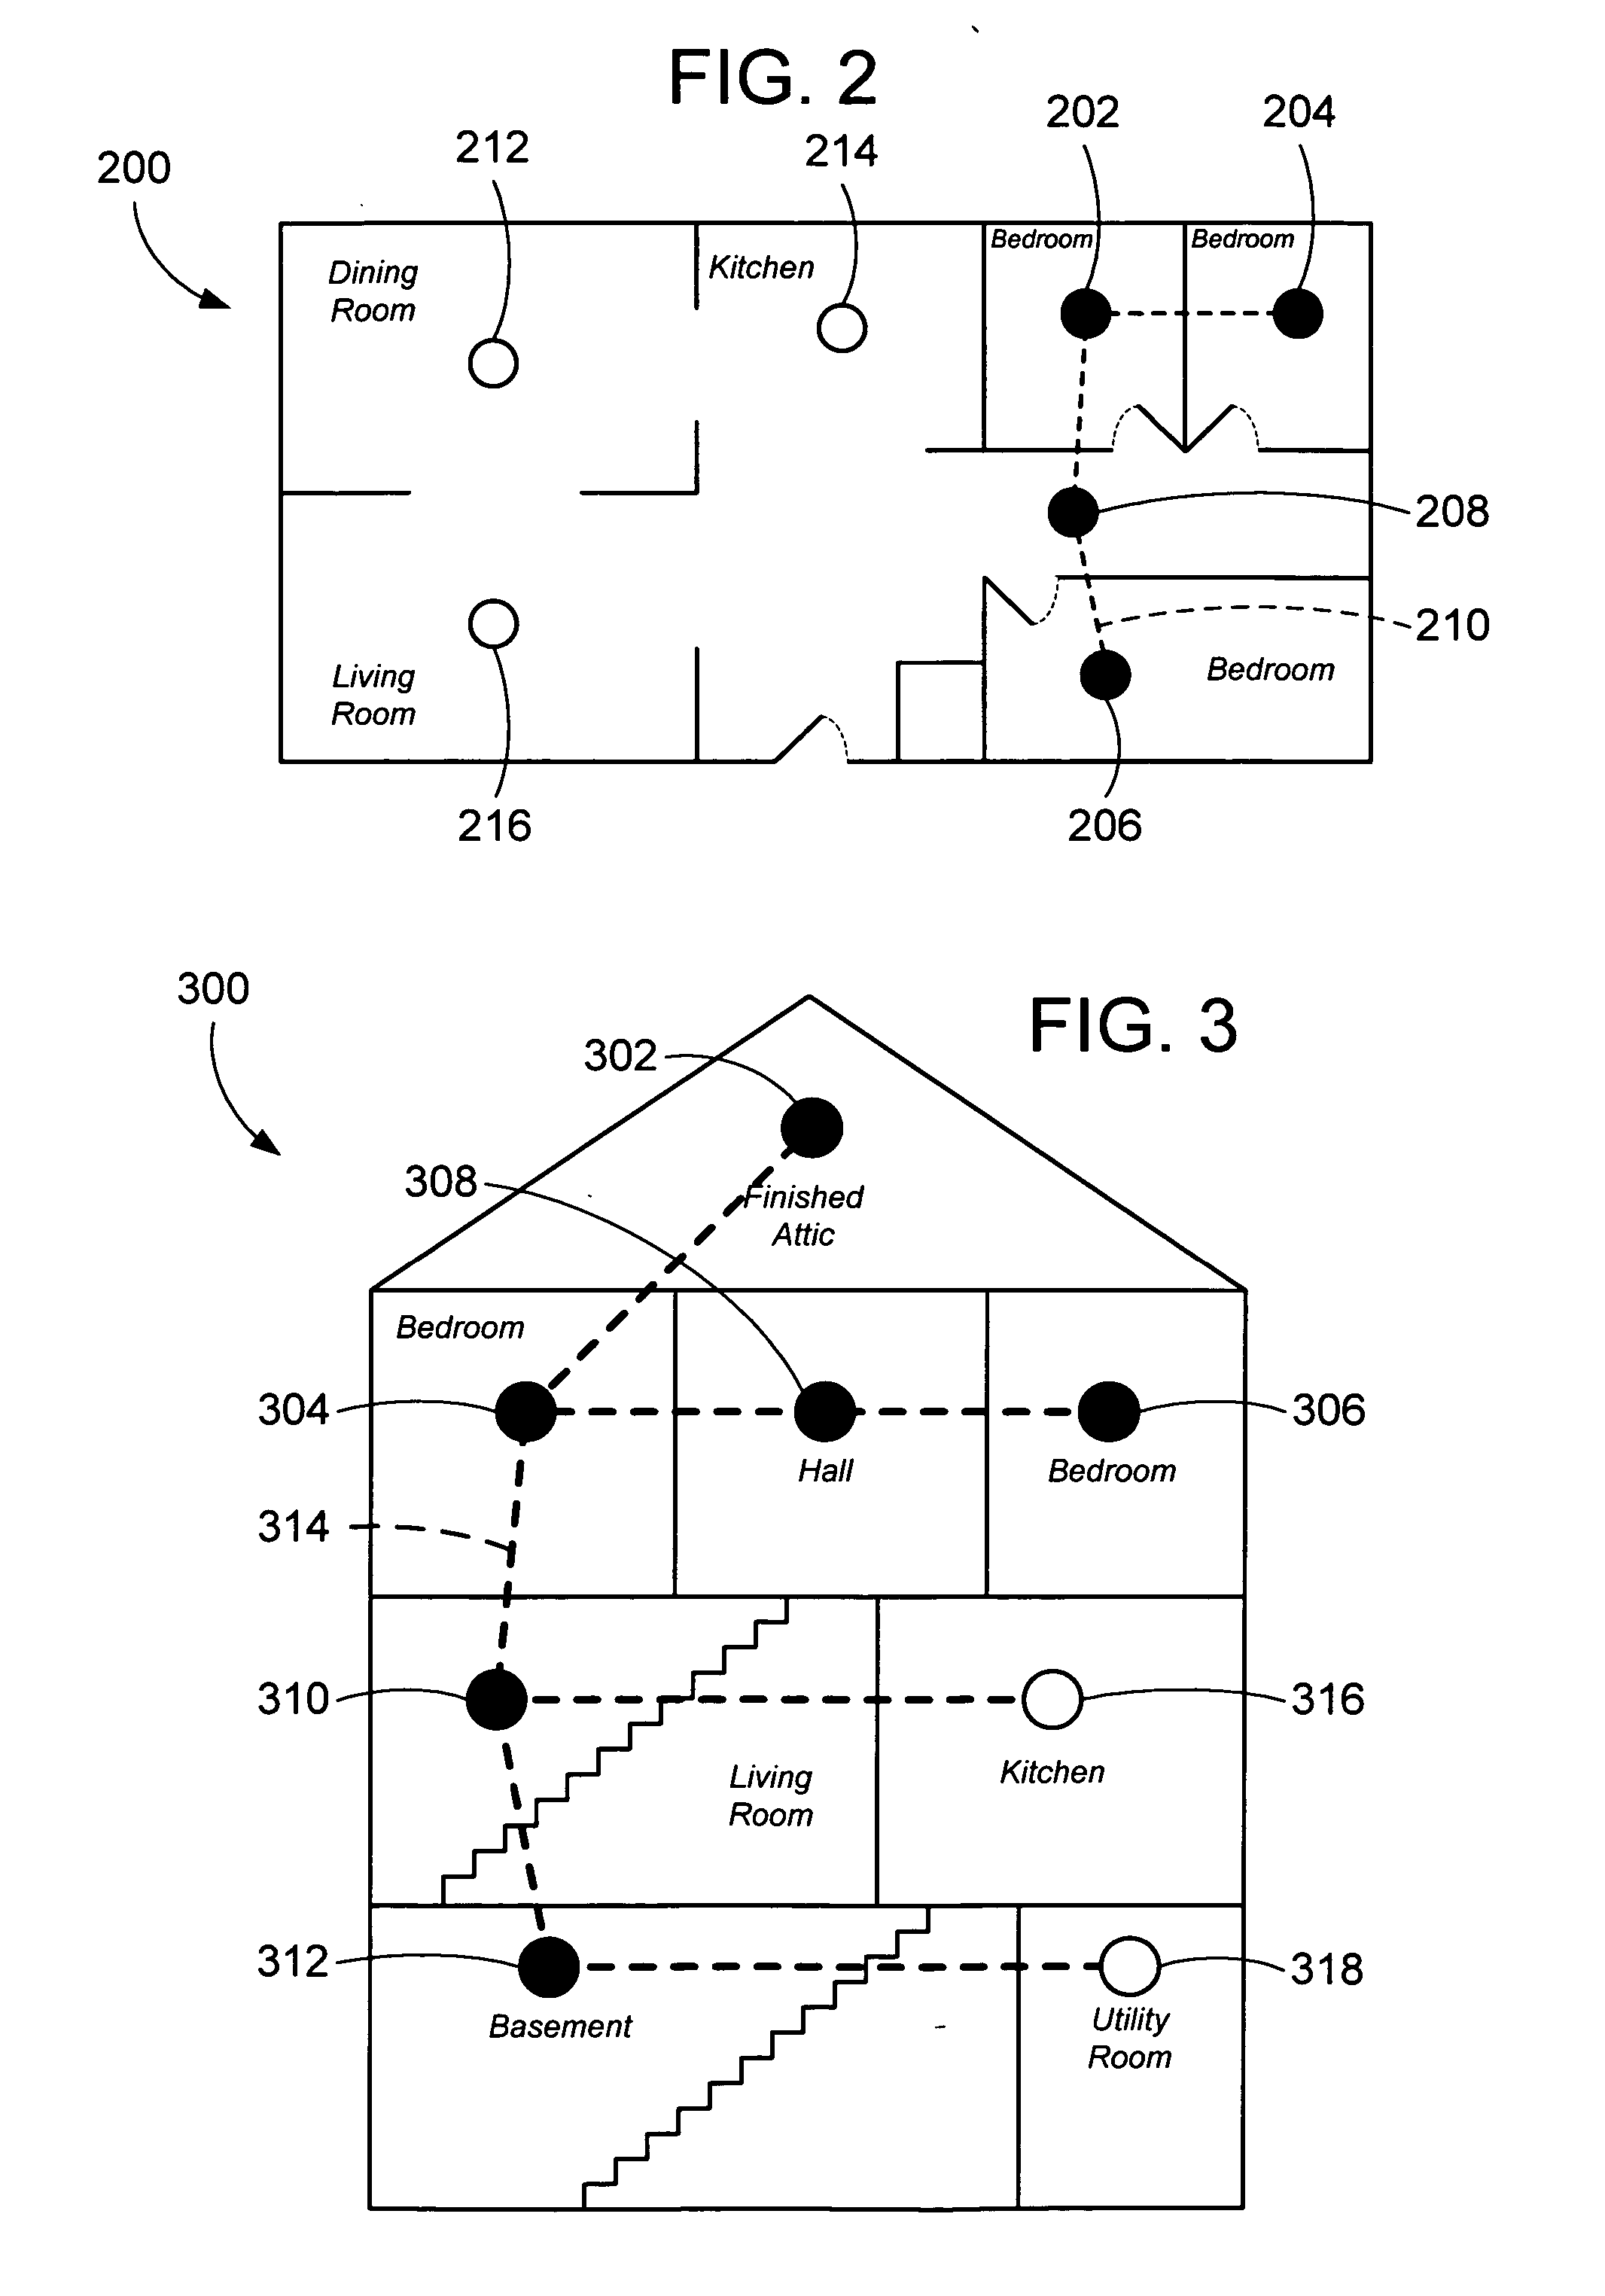 Circuit and method for prioritization of hazardous condition messages for interconnected hazardous condition detectors